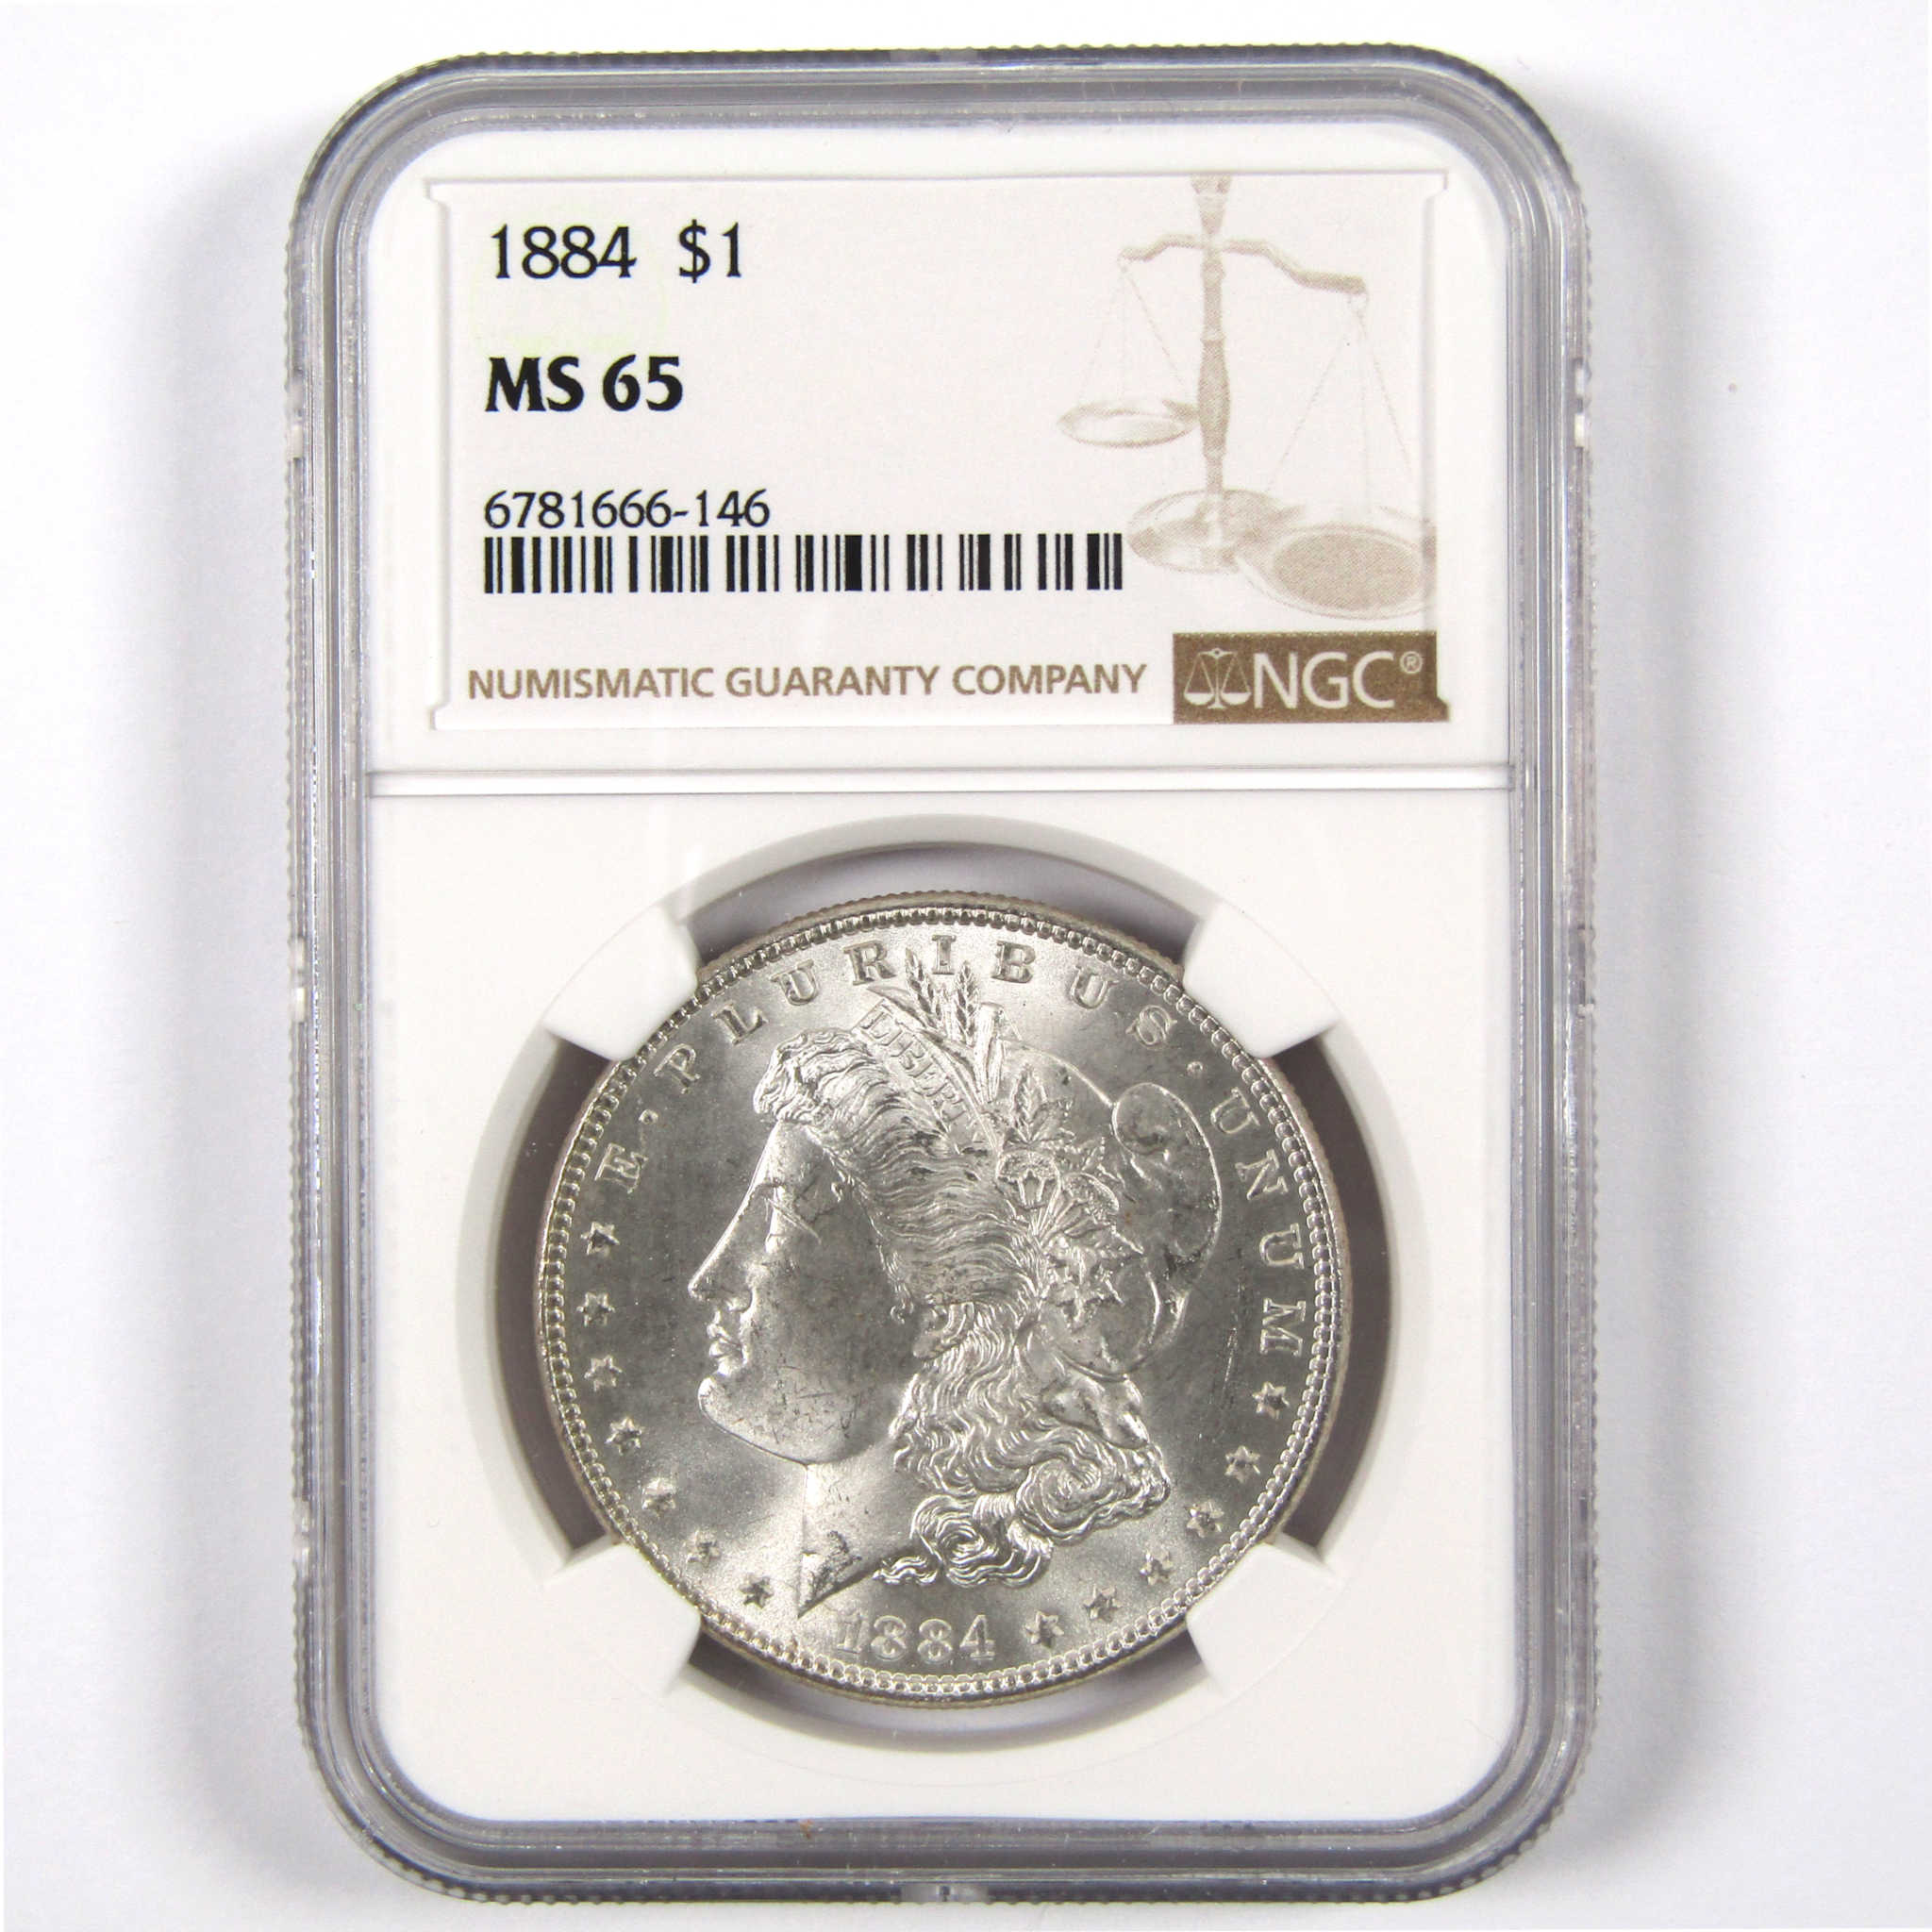 1884 Morgan Dollar MS 65 NGC 90% Silver $1 Uncirculated Coin SKU:I6169 - Morgan coin - Morgan silver dollar - Morgan silver dollar for sale - Profile Coins &amp; Collectibles